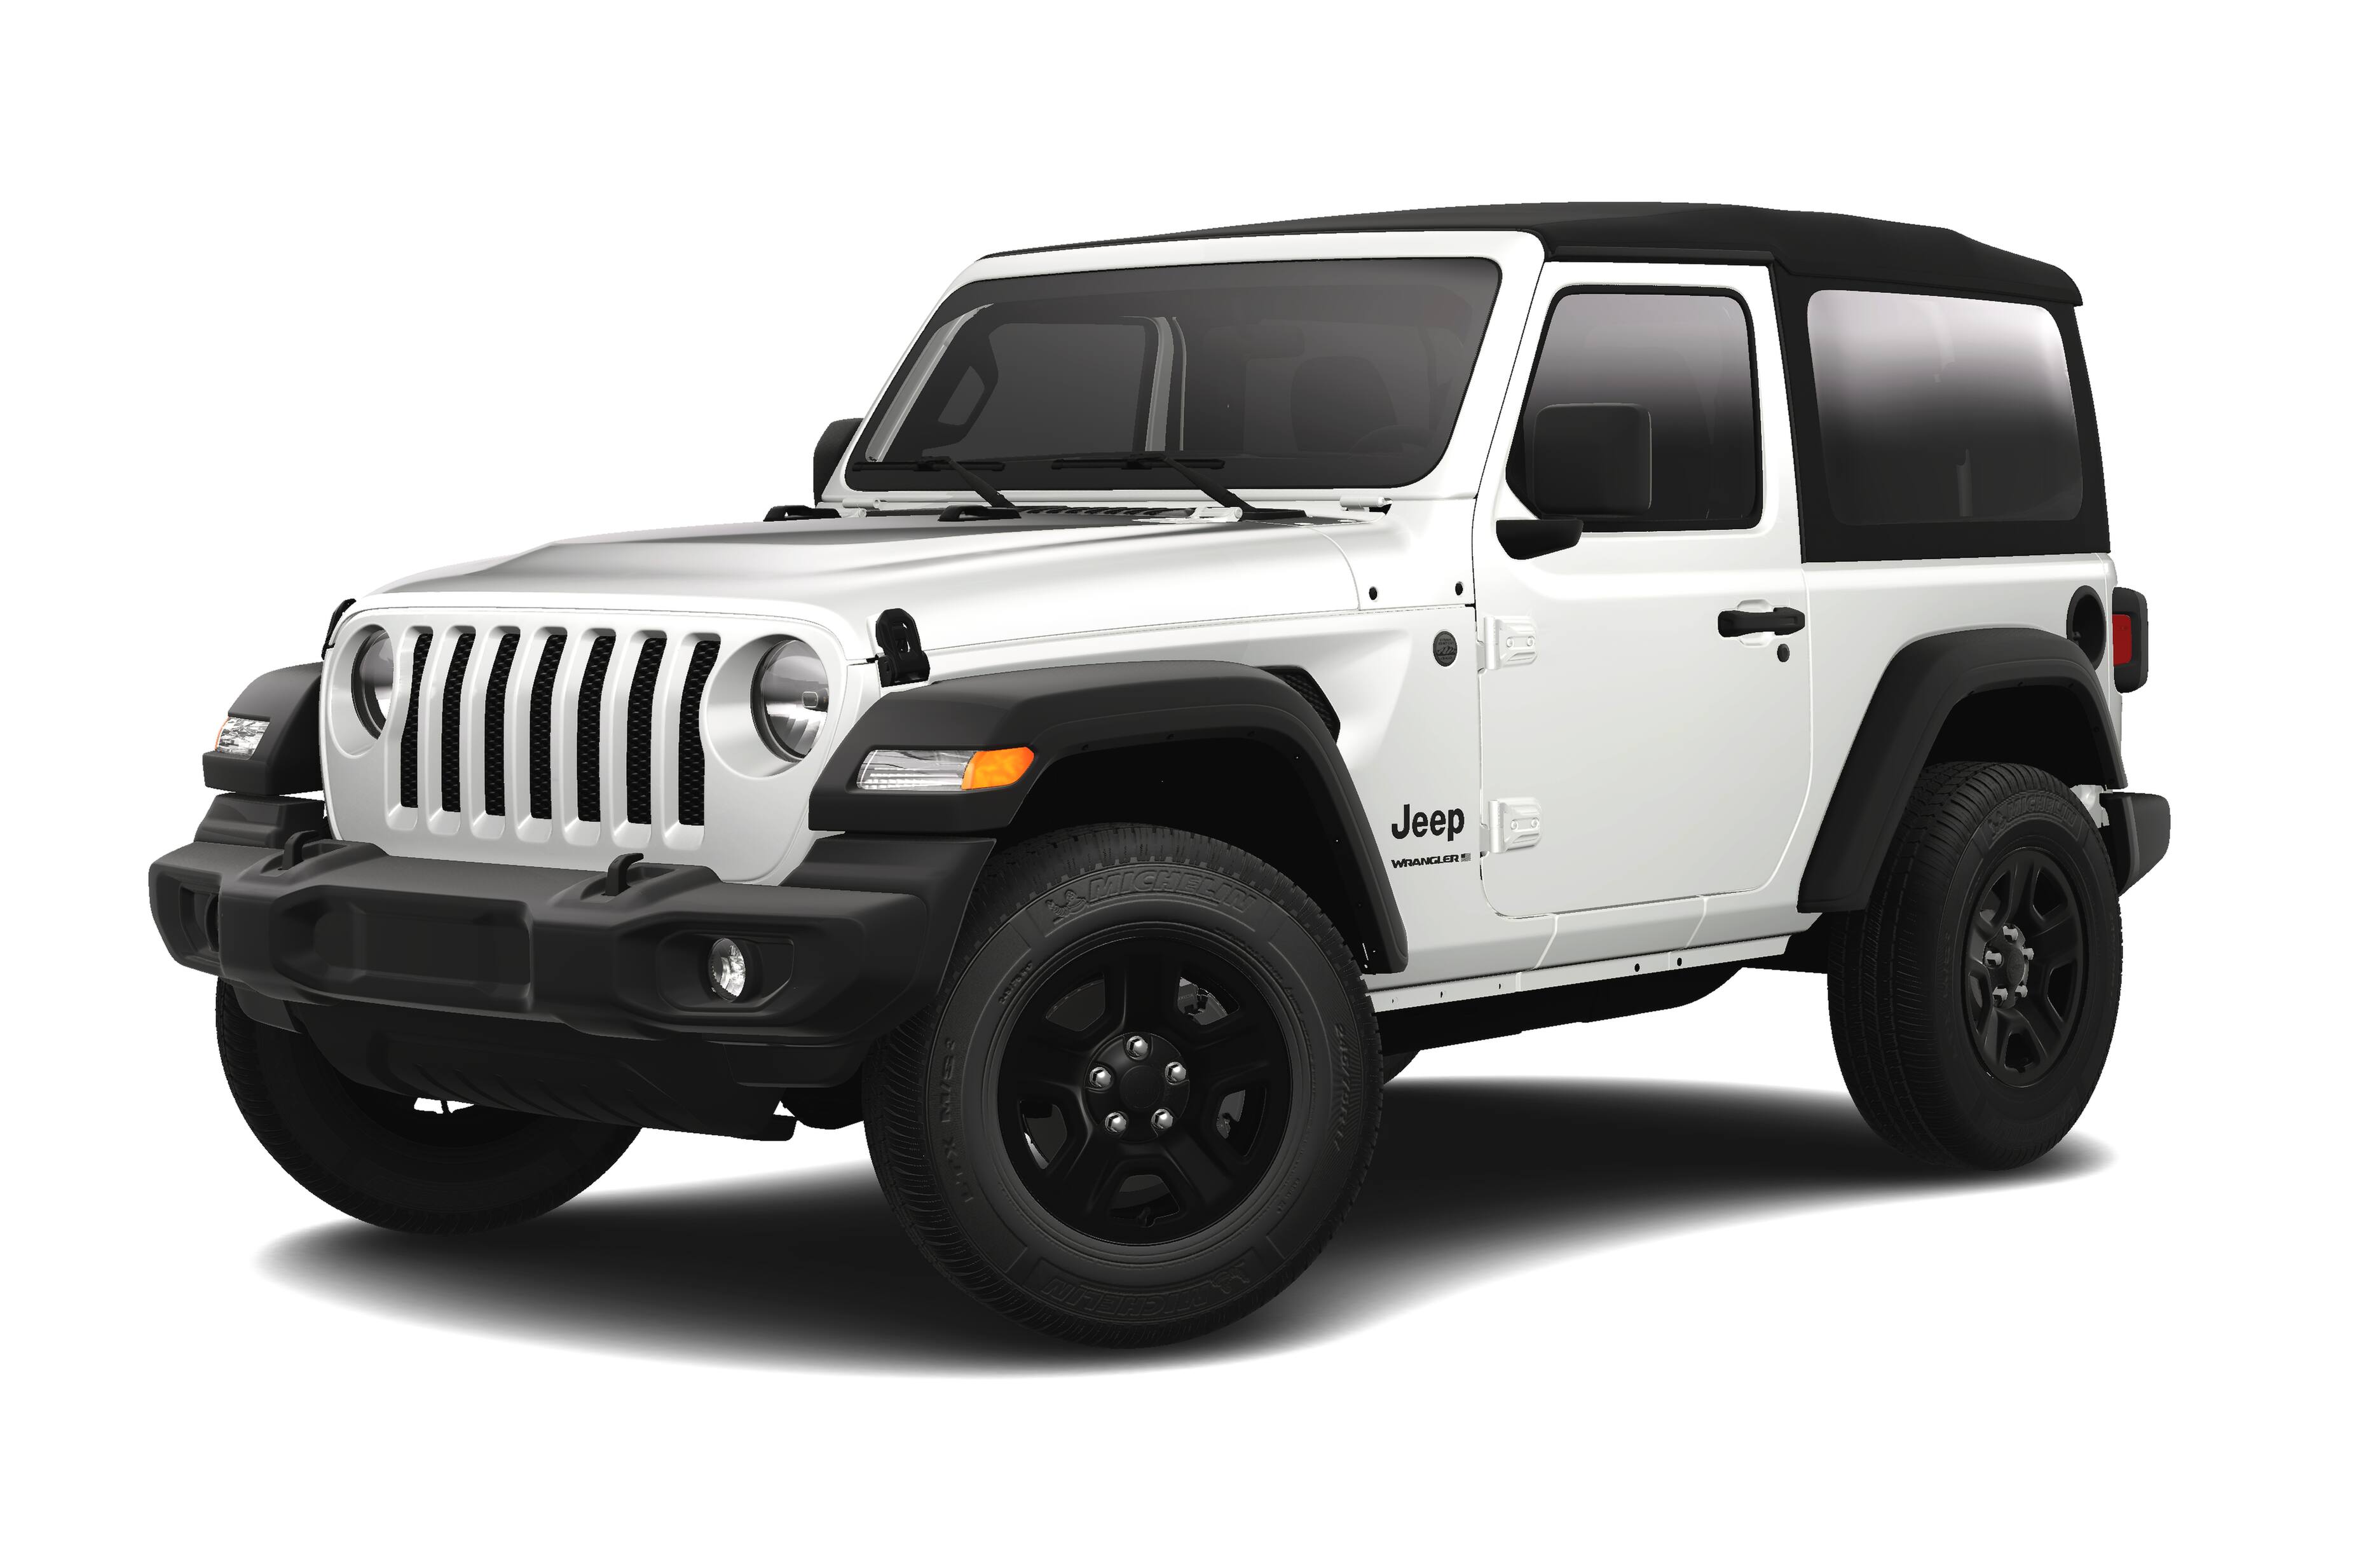 New Jeep Wrangler for Sale in Escondido, San Diego, CA | Jack Powell